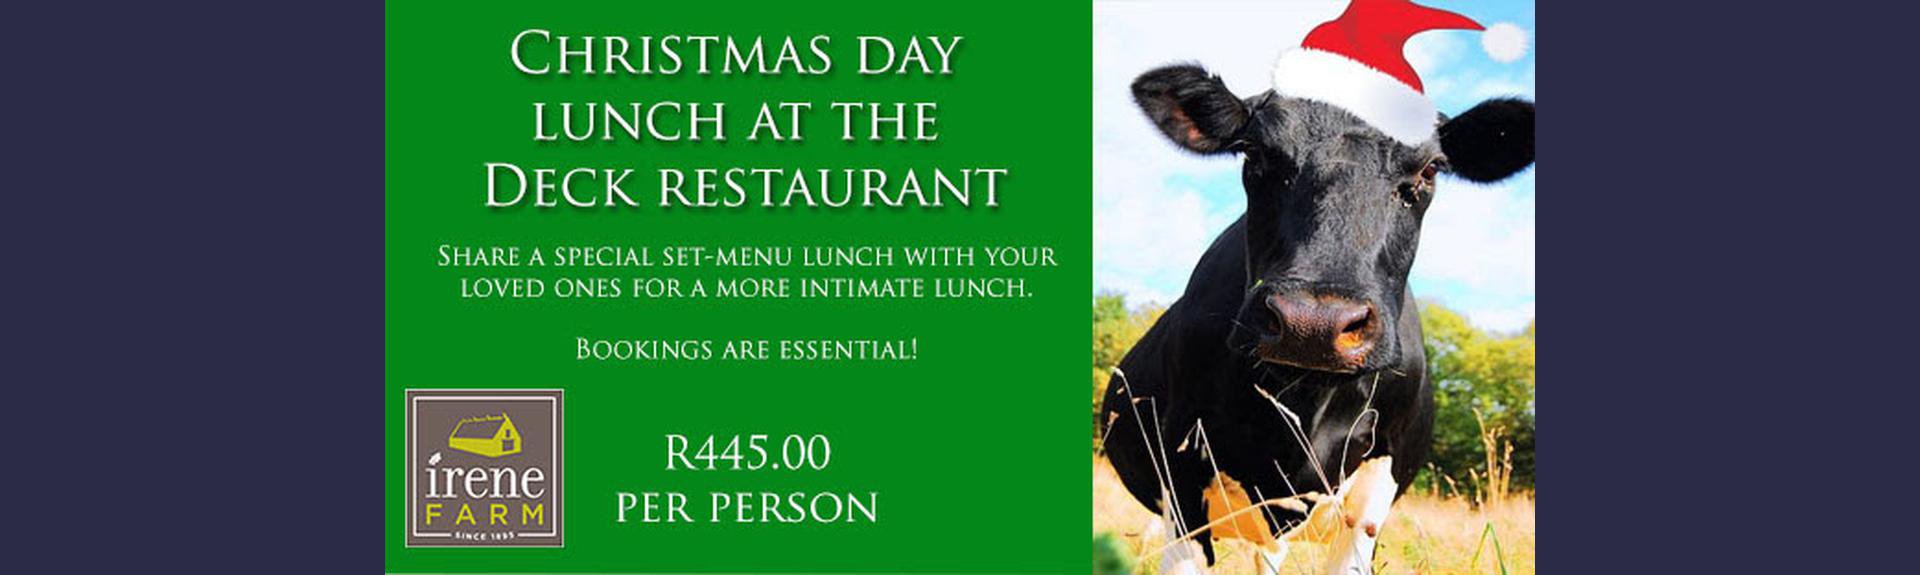 Christmas Lunch at The Deck Restaurant